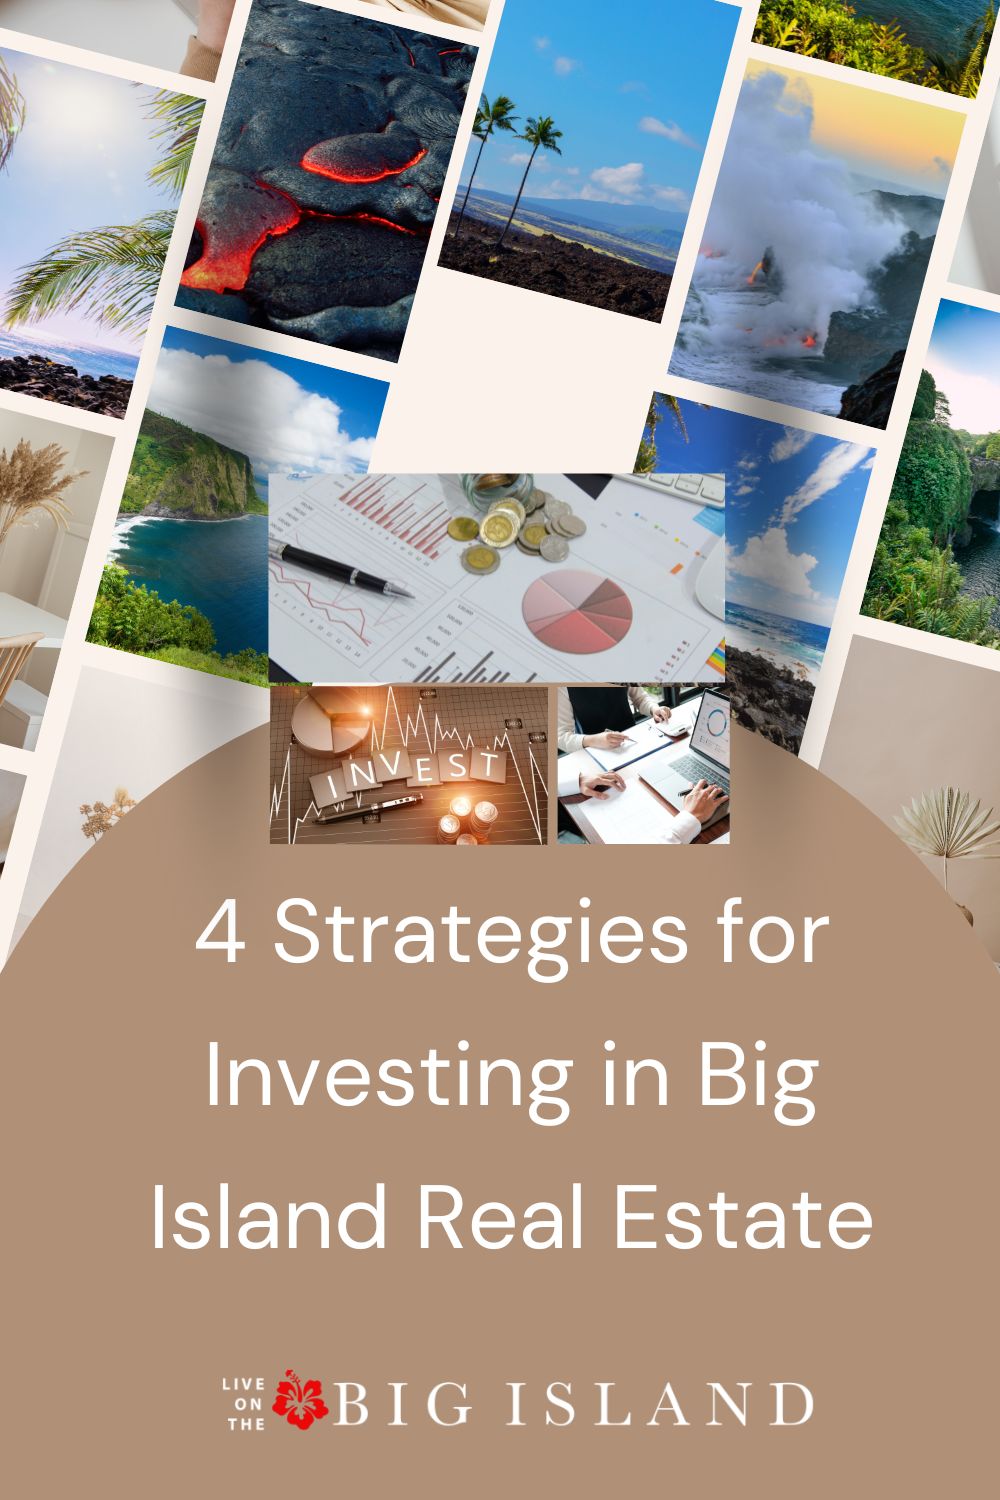 4 Strategies for Investing in Big Island Real Estate